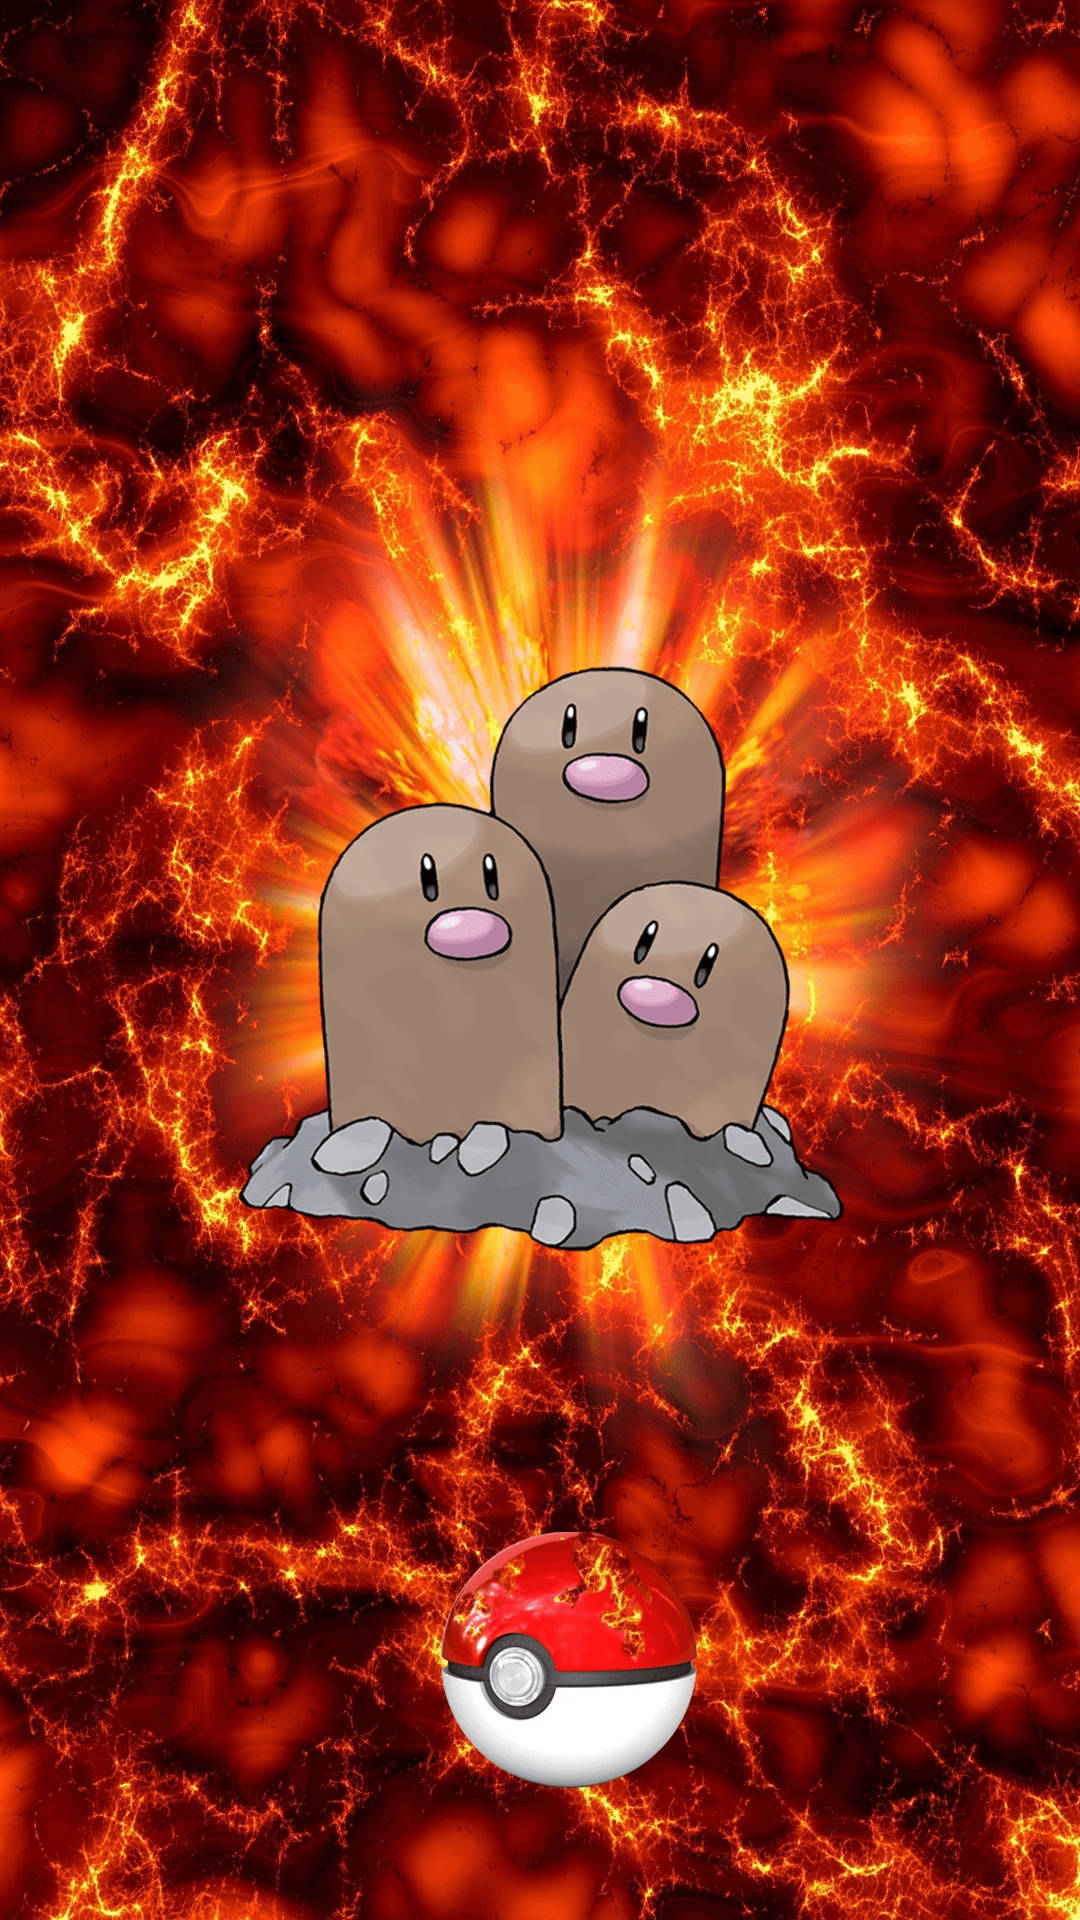 Iphone Pokemon Dugtrio Fiery Red Background Wallpaper